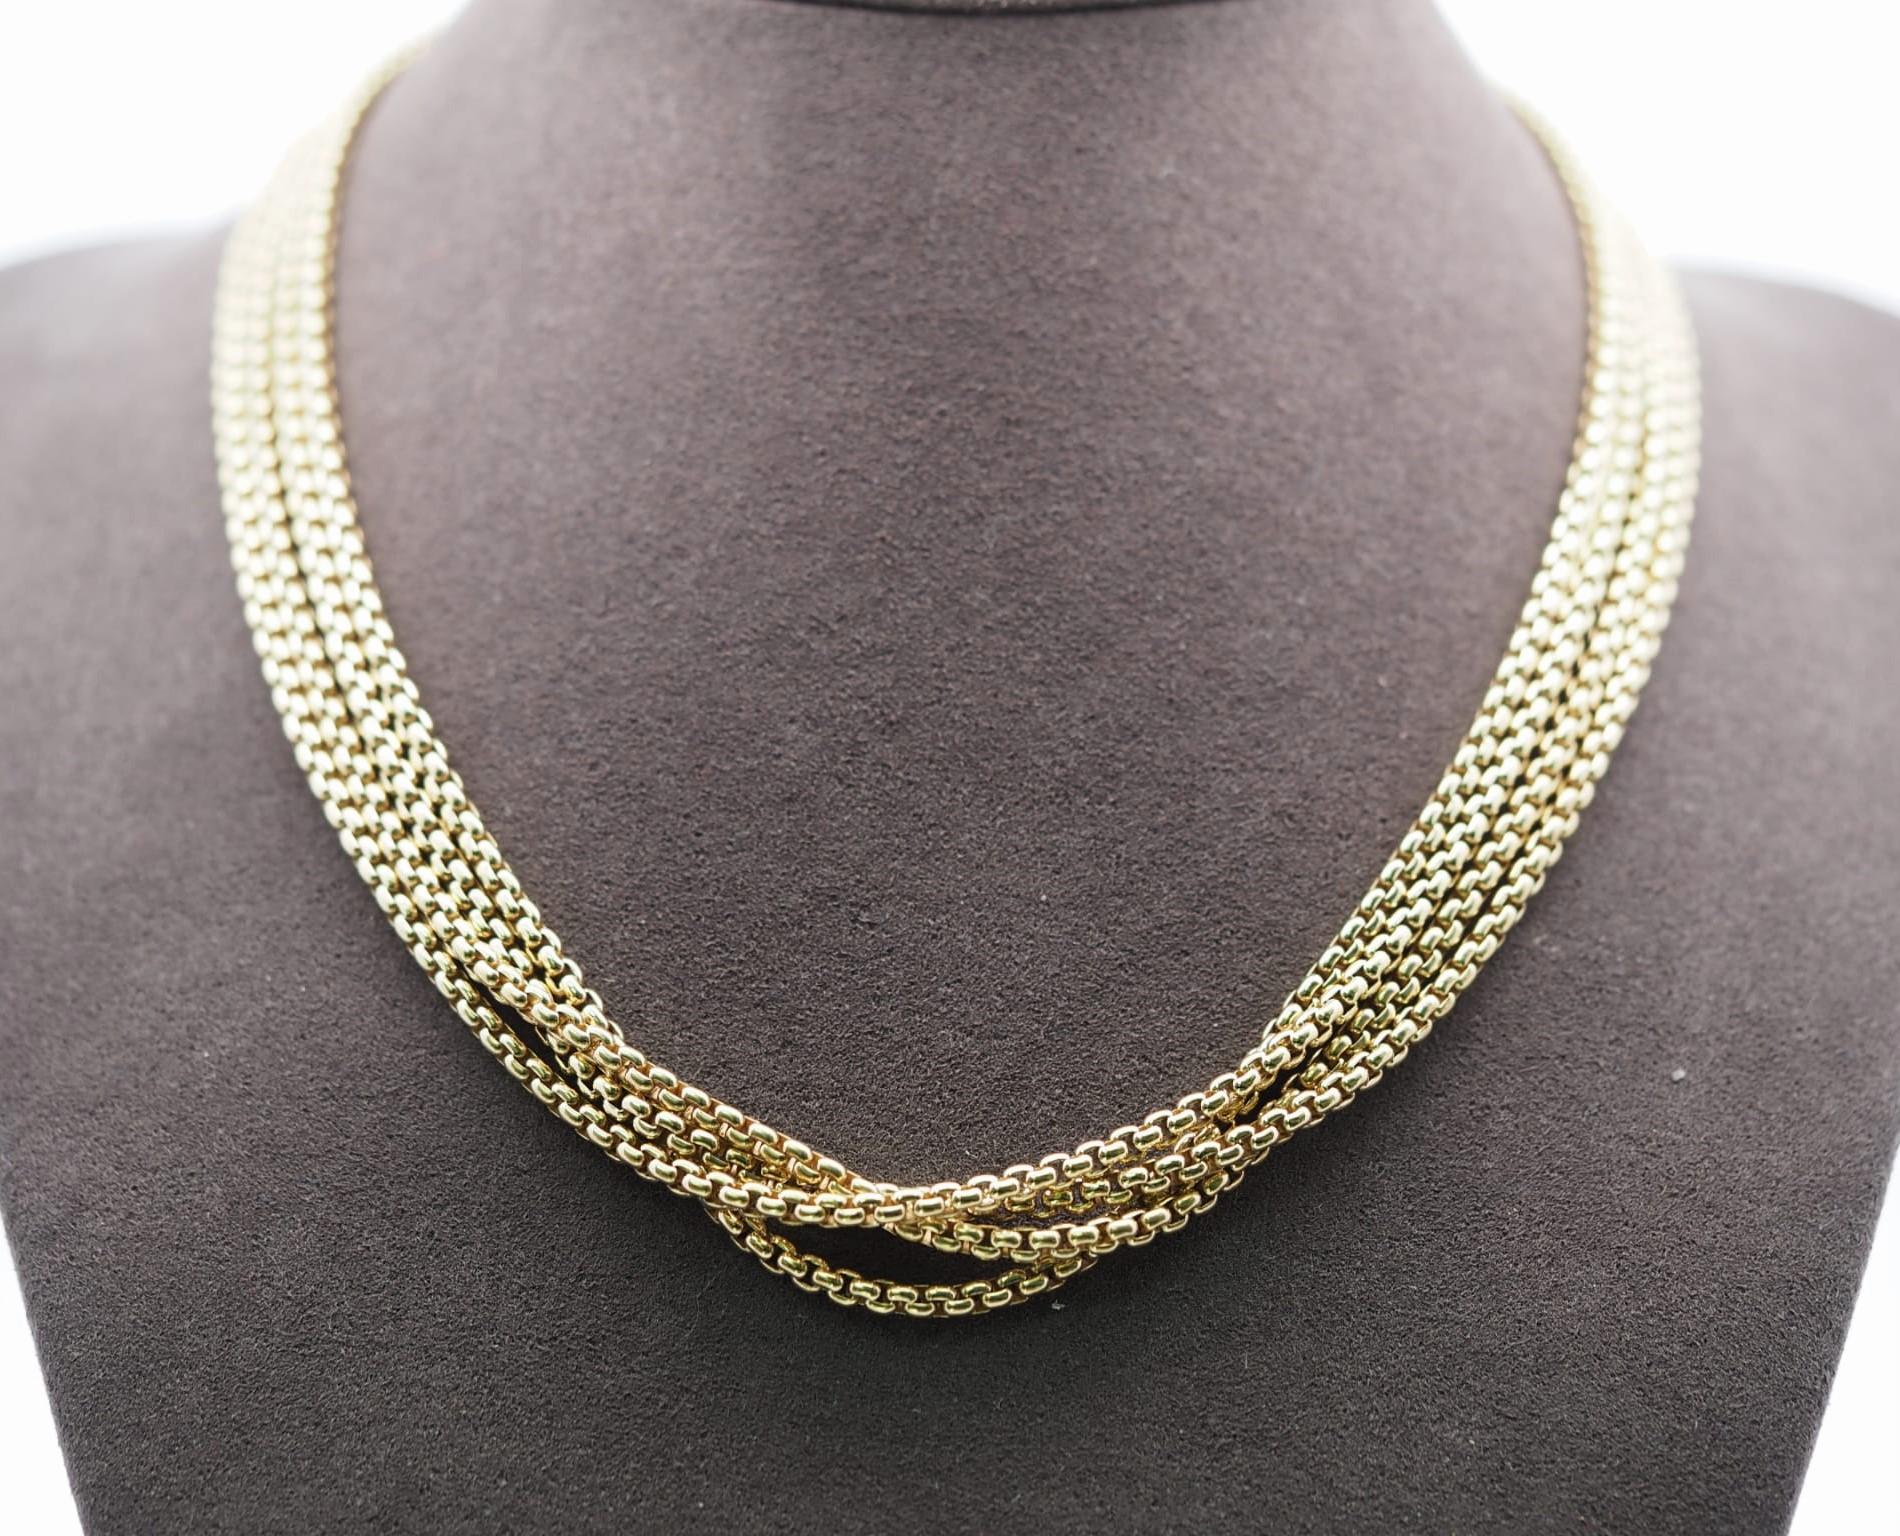 David Yurman Gold Multi Chain Necklace in 18 Karat Yellow Gold

Metal   - Yellow Gold
Metal purity   - 18K
Condition  - Excellent
Style  - 4 chains Necklace
Weight   - 80.2 grams
Markings  - 